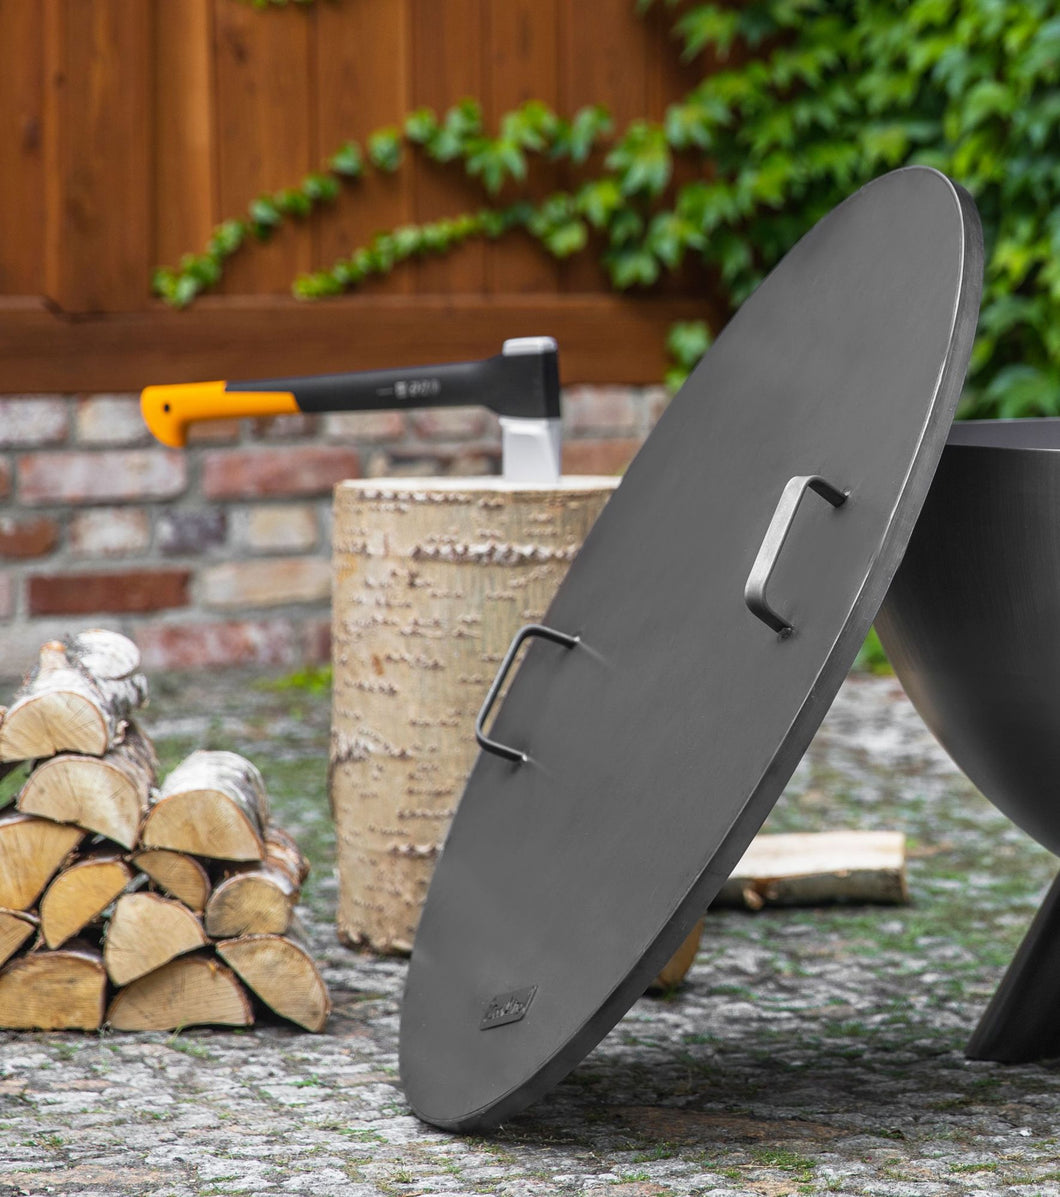 The Cook King fire pit lid with two handles leant against a fire pit with wood logs in the background.